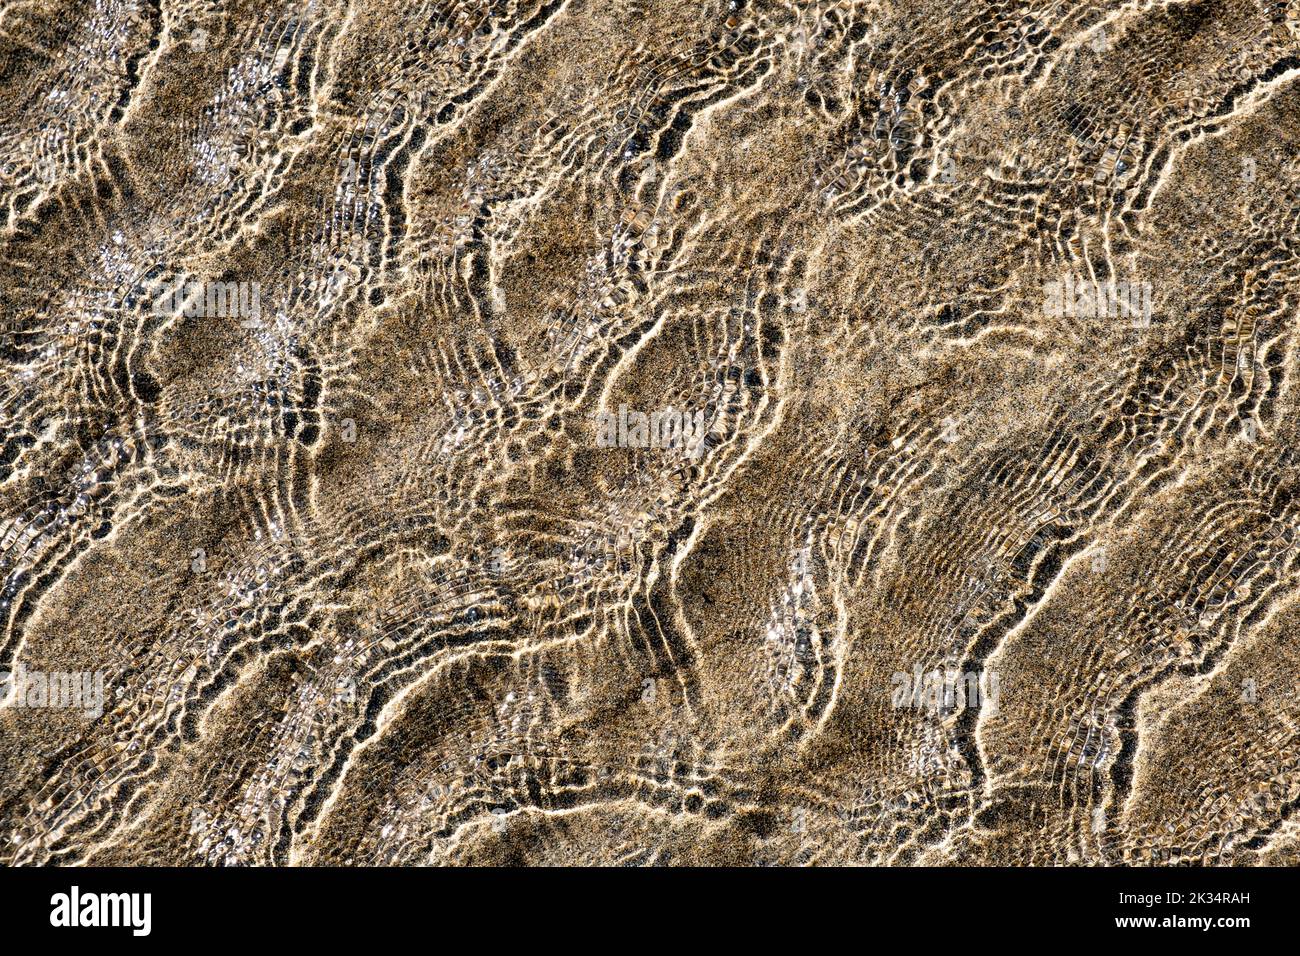 Ripples in the ocean at low tide creating patterns in the sand, Cornwall, England. Stock Photo